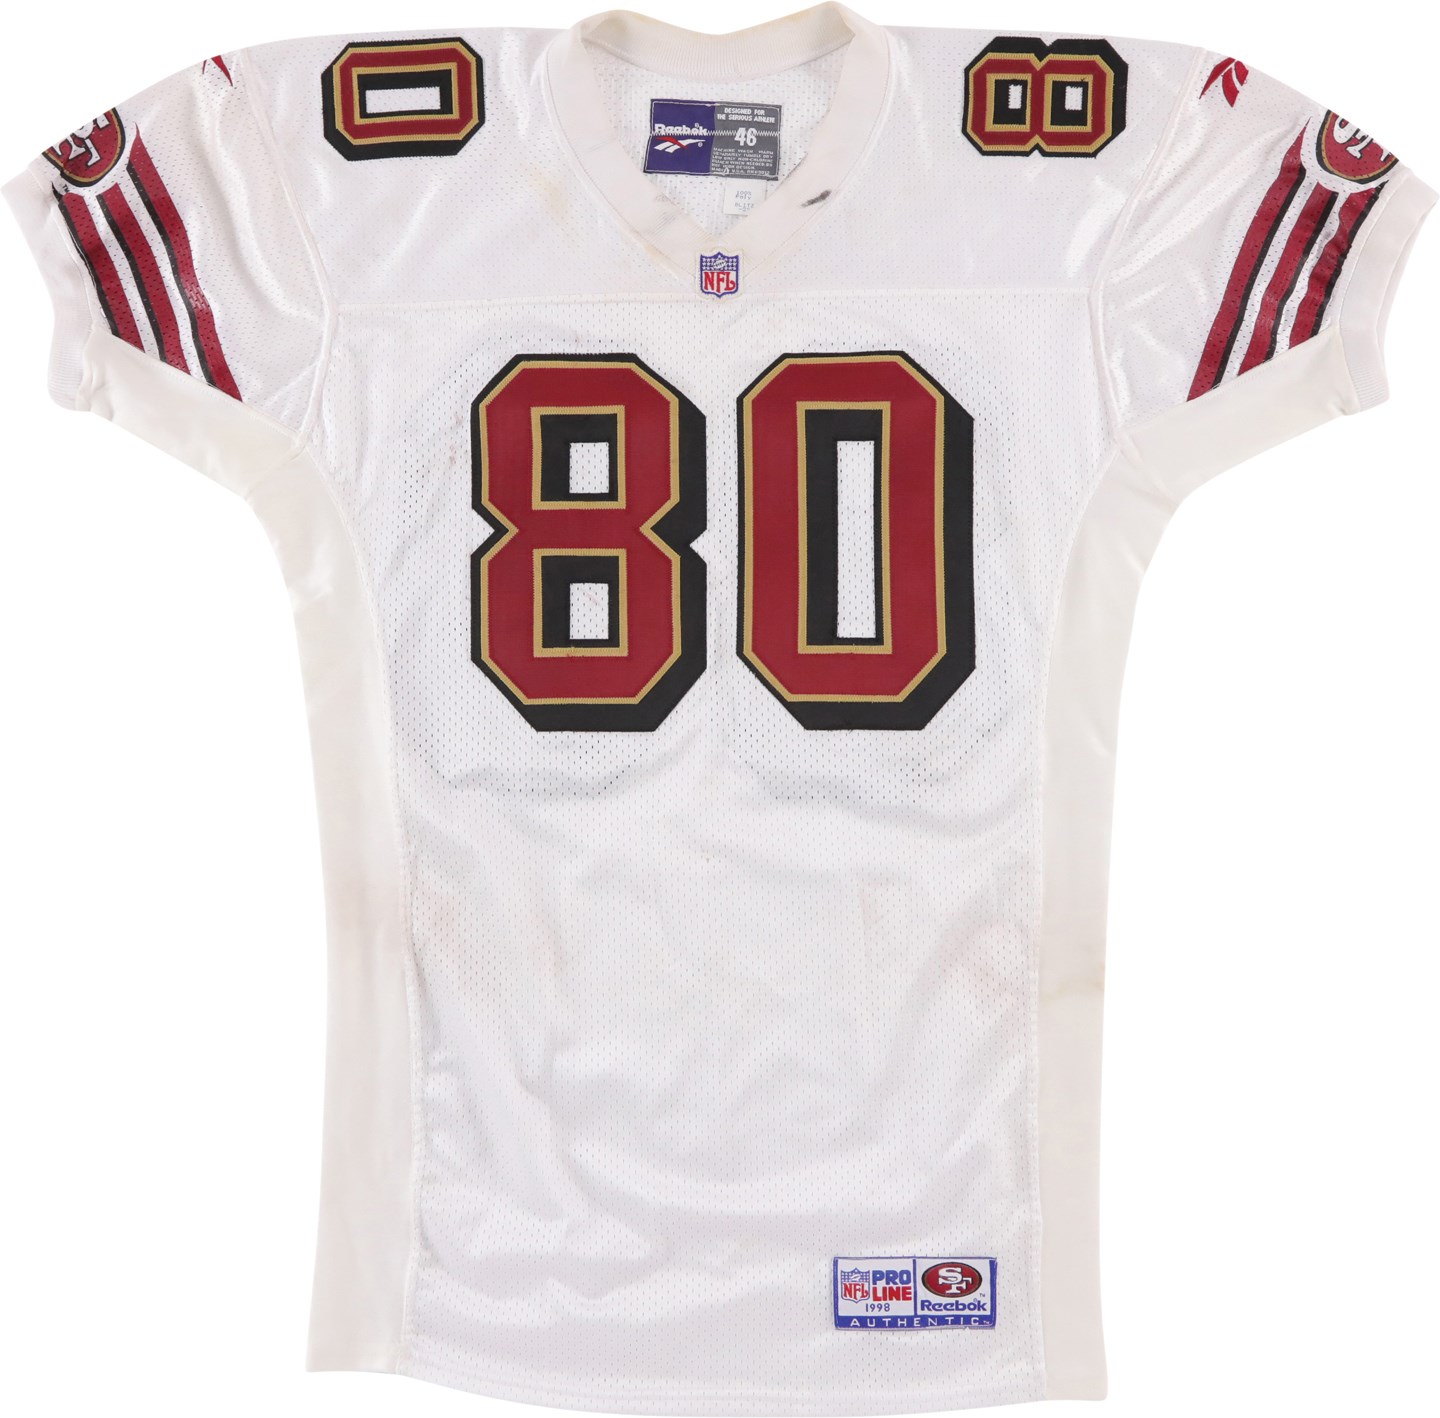 - 1998 Jerry Rice San Francisco 49ers Game Worn Jersey Attributed to Record-Setting 11/1/98 Game - Young & Rice Connect for NFL Record 80 Touchdowns ("Apparent" Photo-Match)